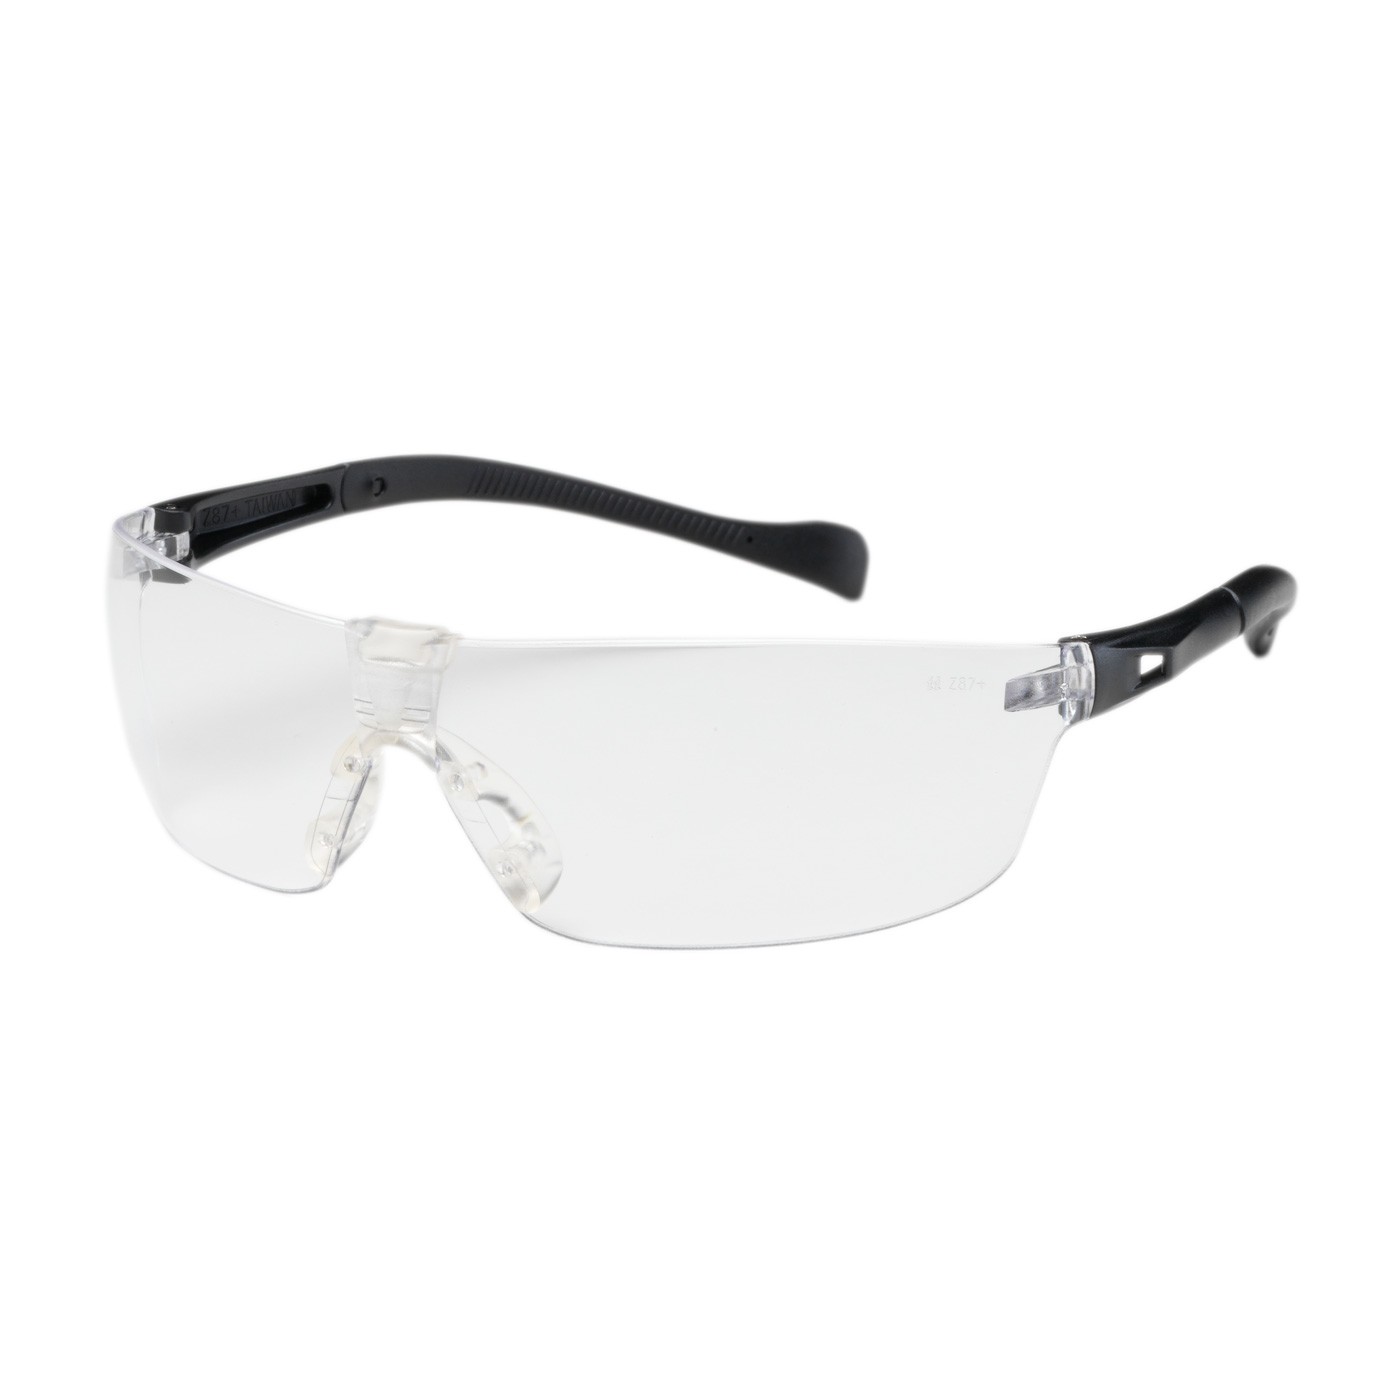 Monteray II™ Rimless Safety Glasses with Black Temple, Clear Lens and Anti-Scratch Coating  (#250-MT-10070)